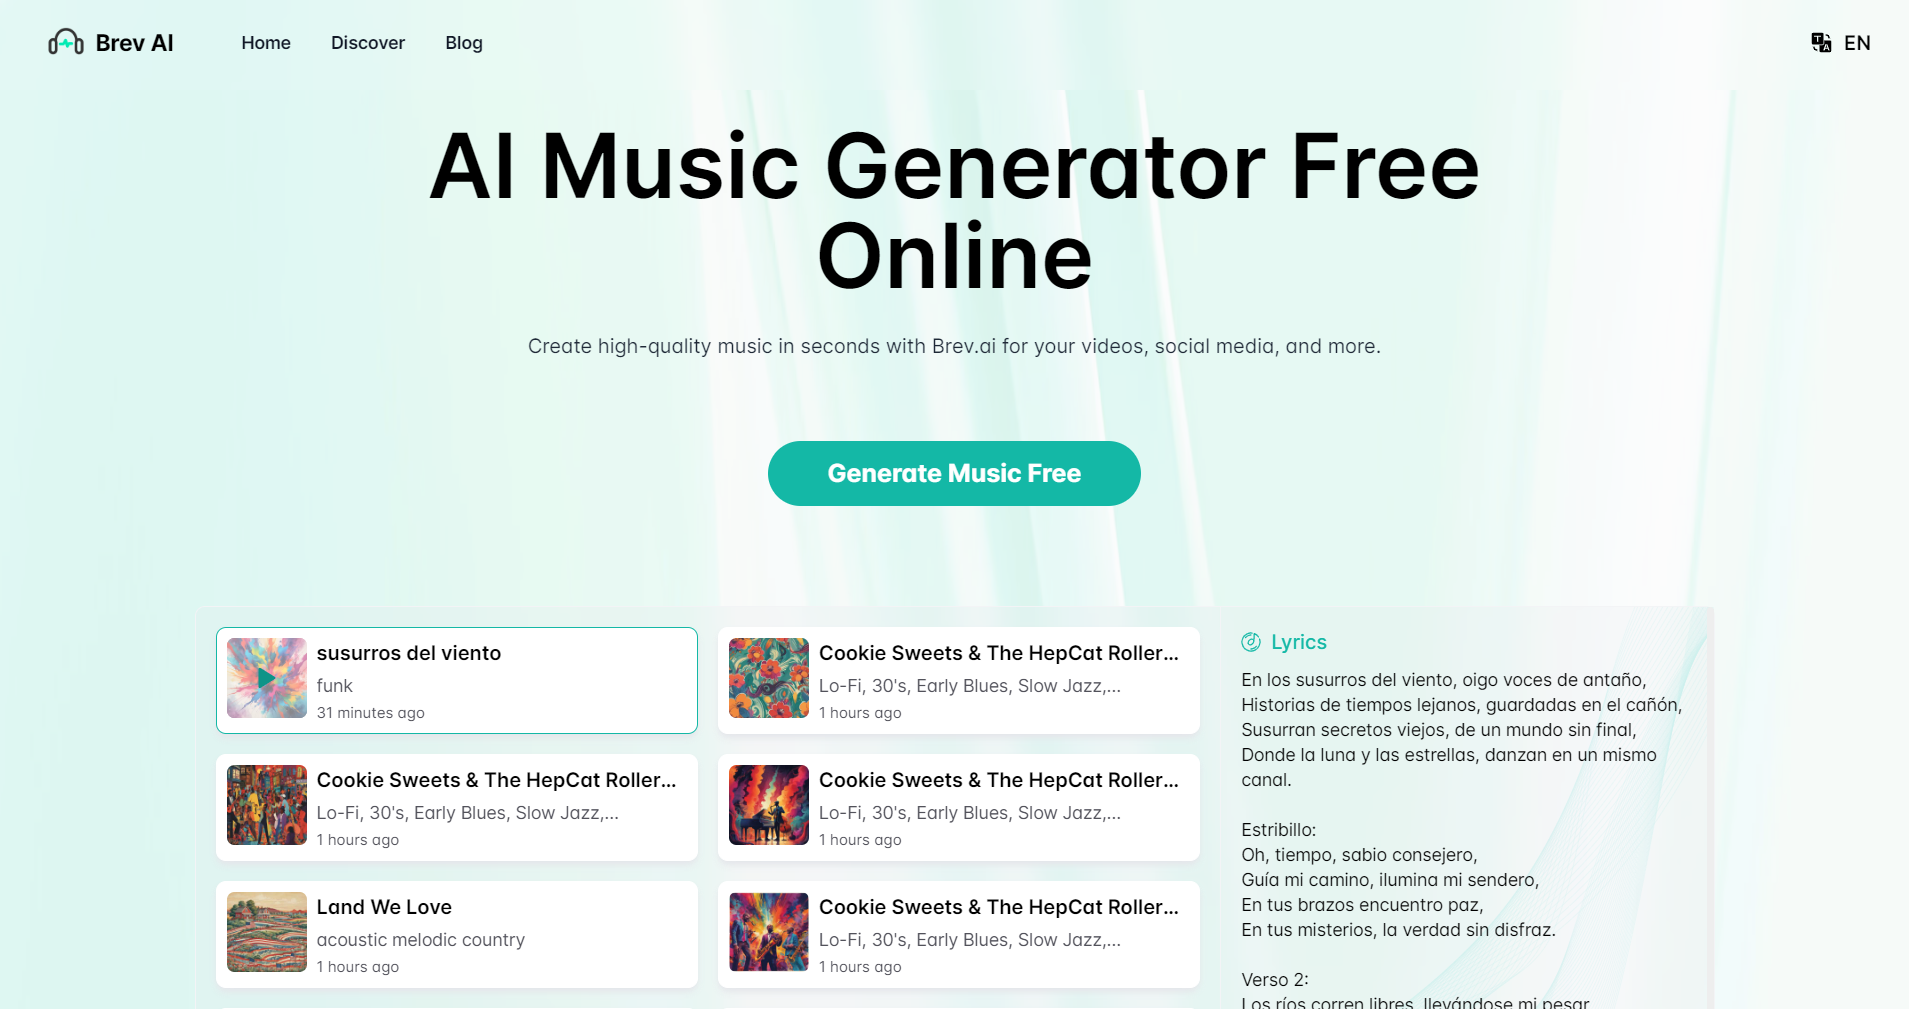 startuptile Brev.ai: AI Music Generator Free Online-Create quality music from text instantly free and online.